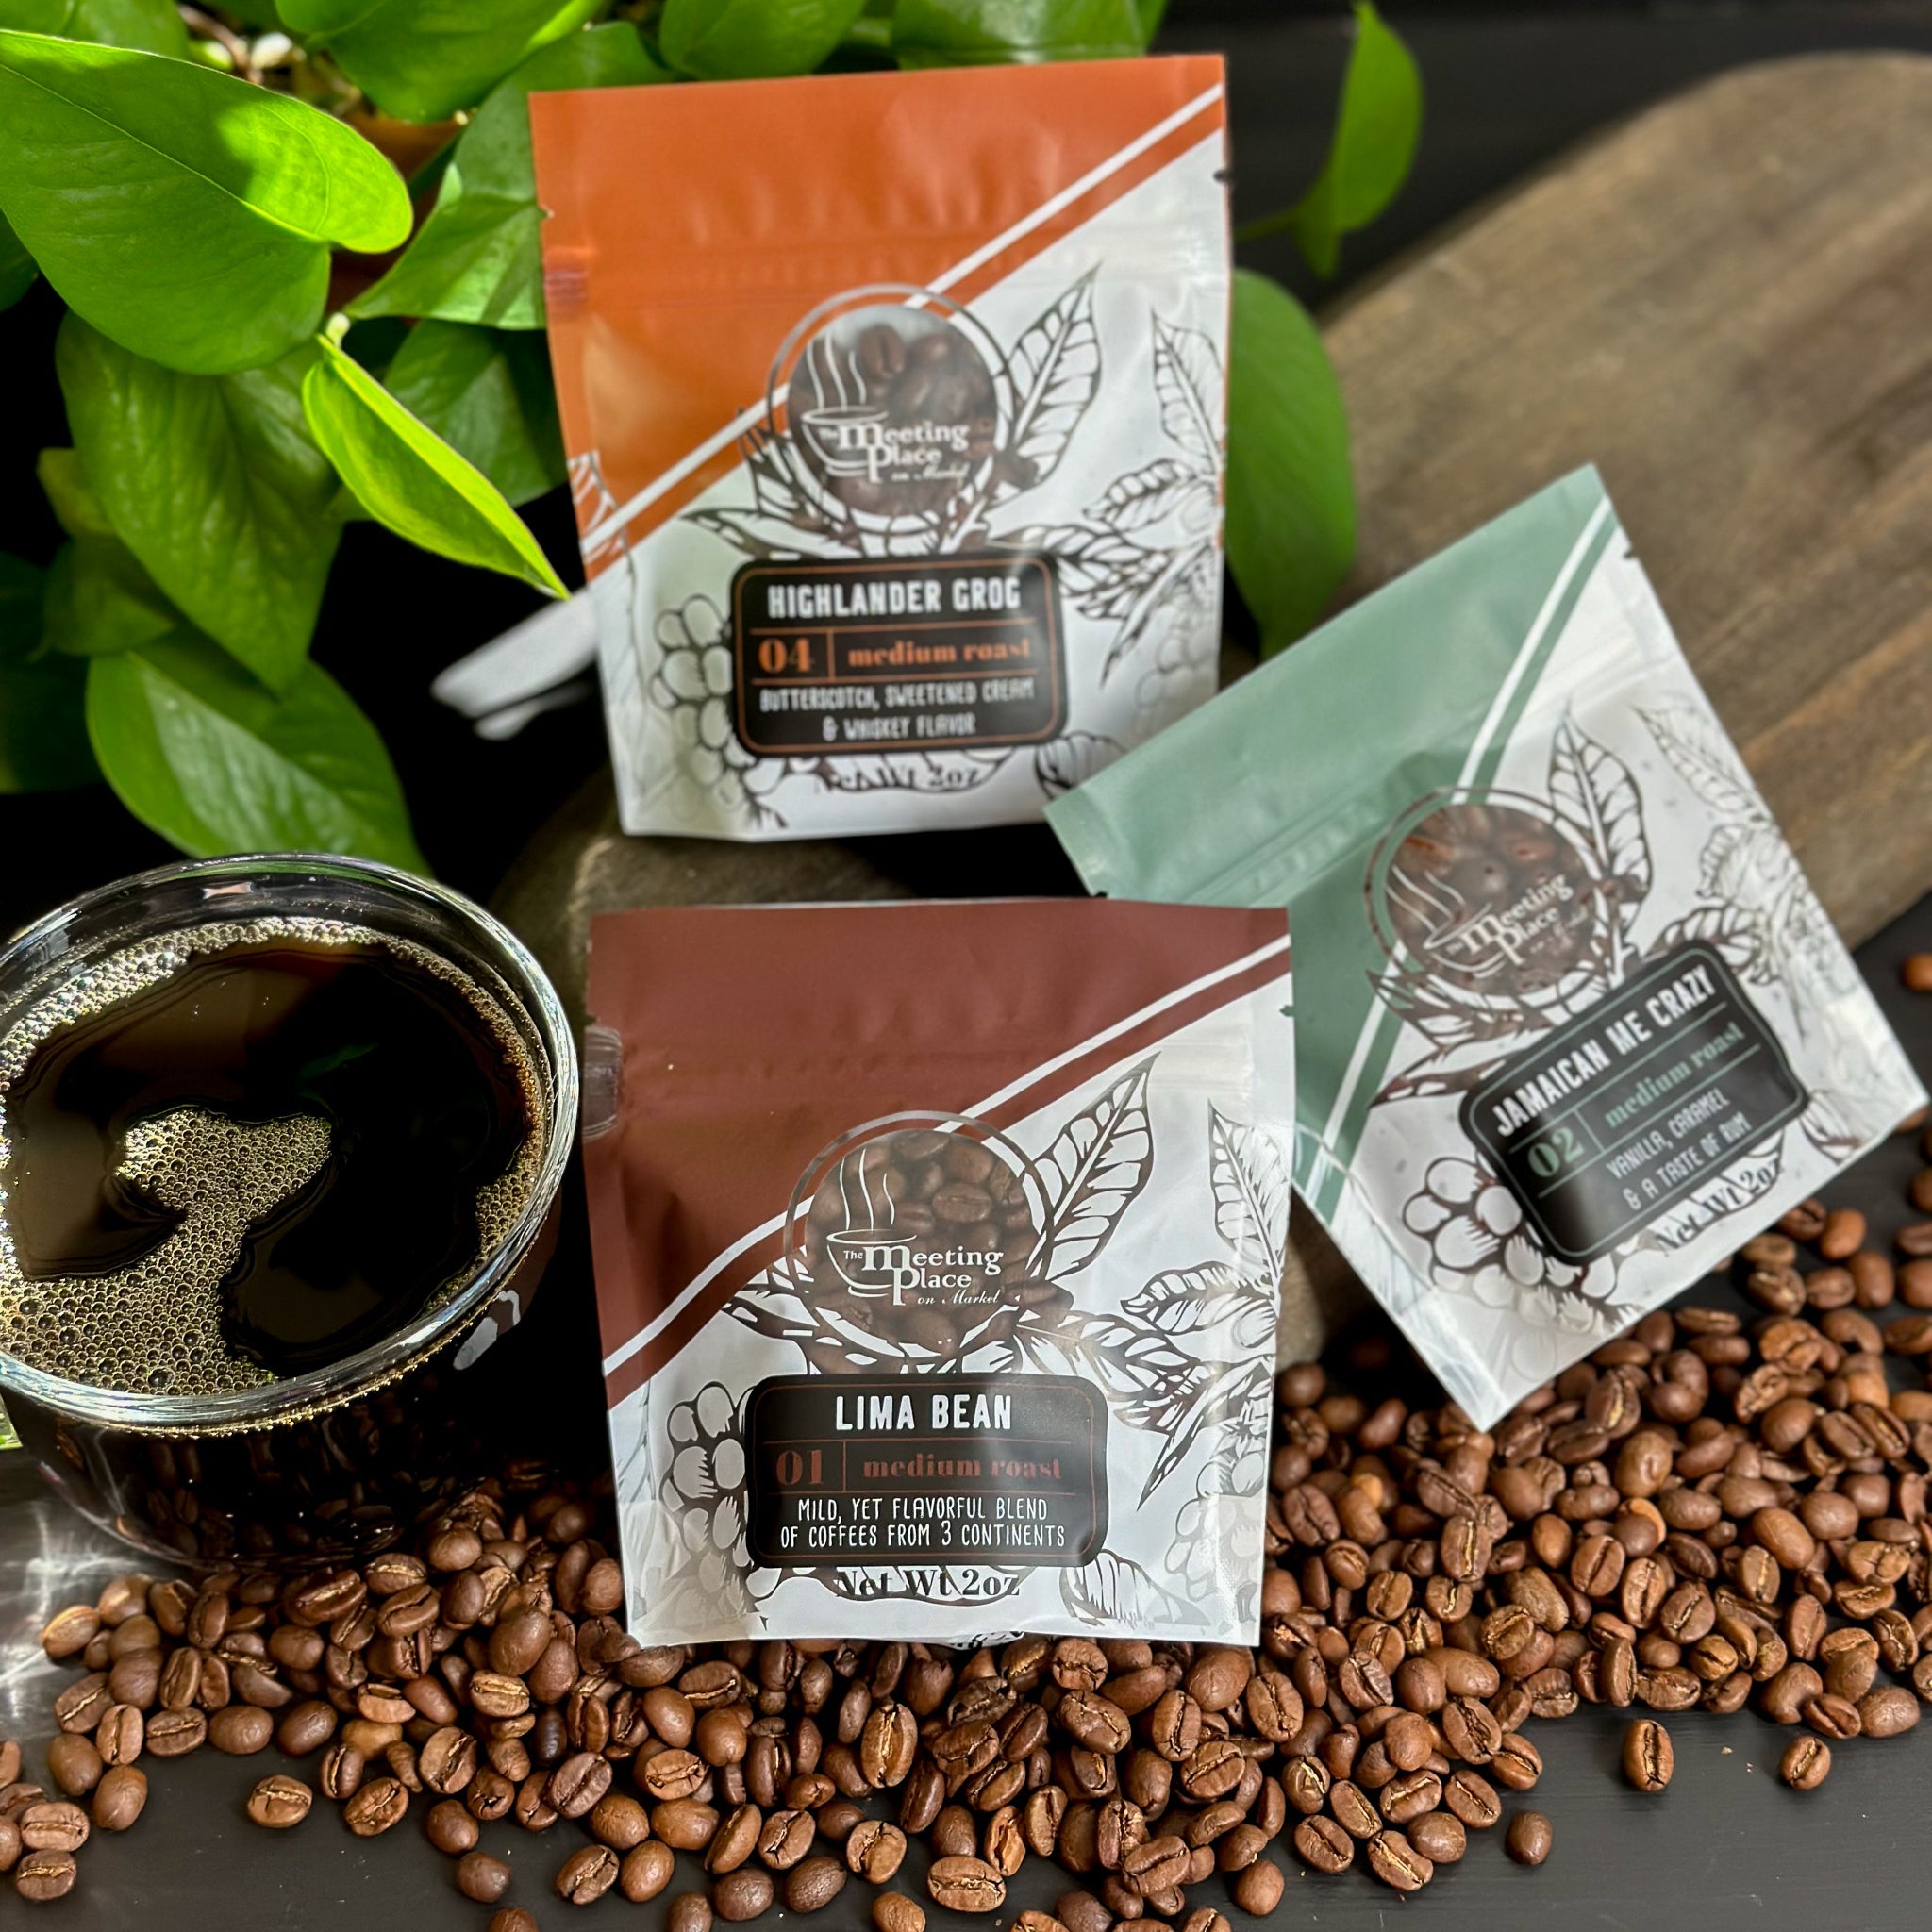 Variety of 3 Decaf Gourmet Coffees Sampler Gifts - The Meeting Place on Market